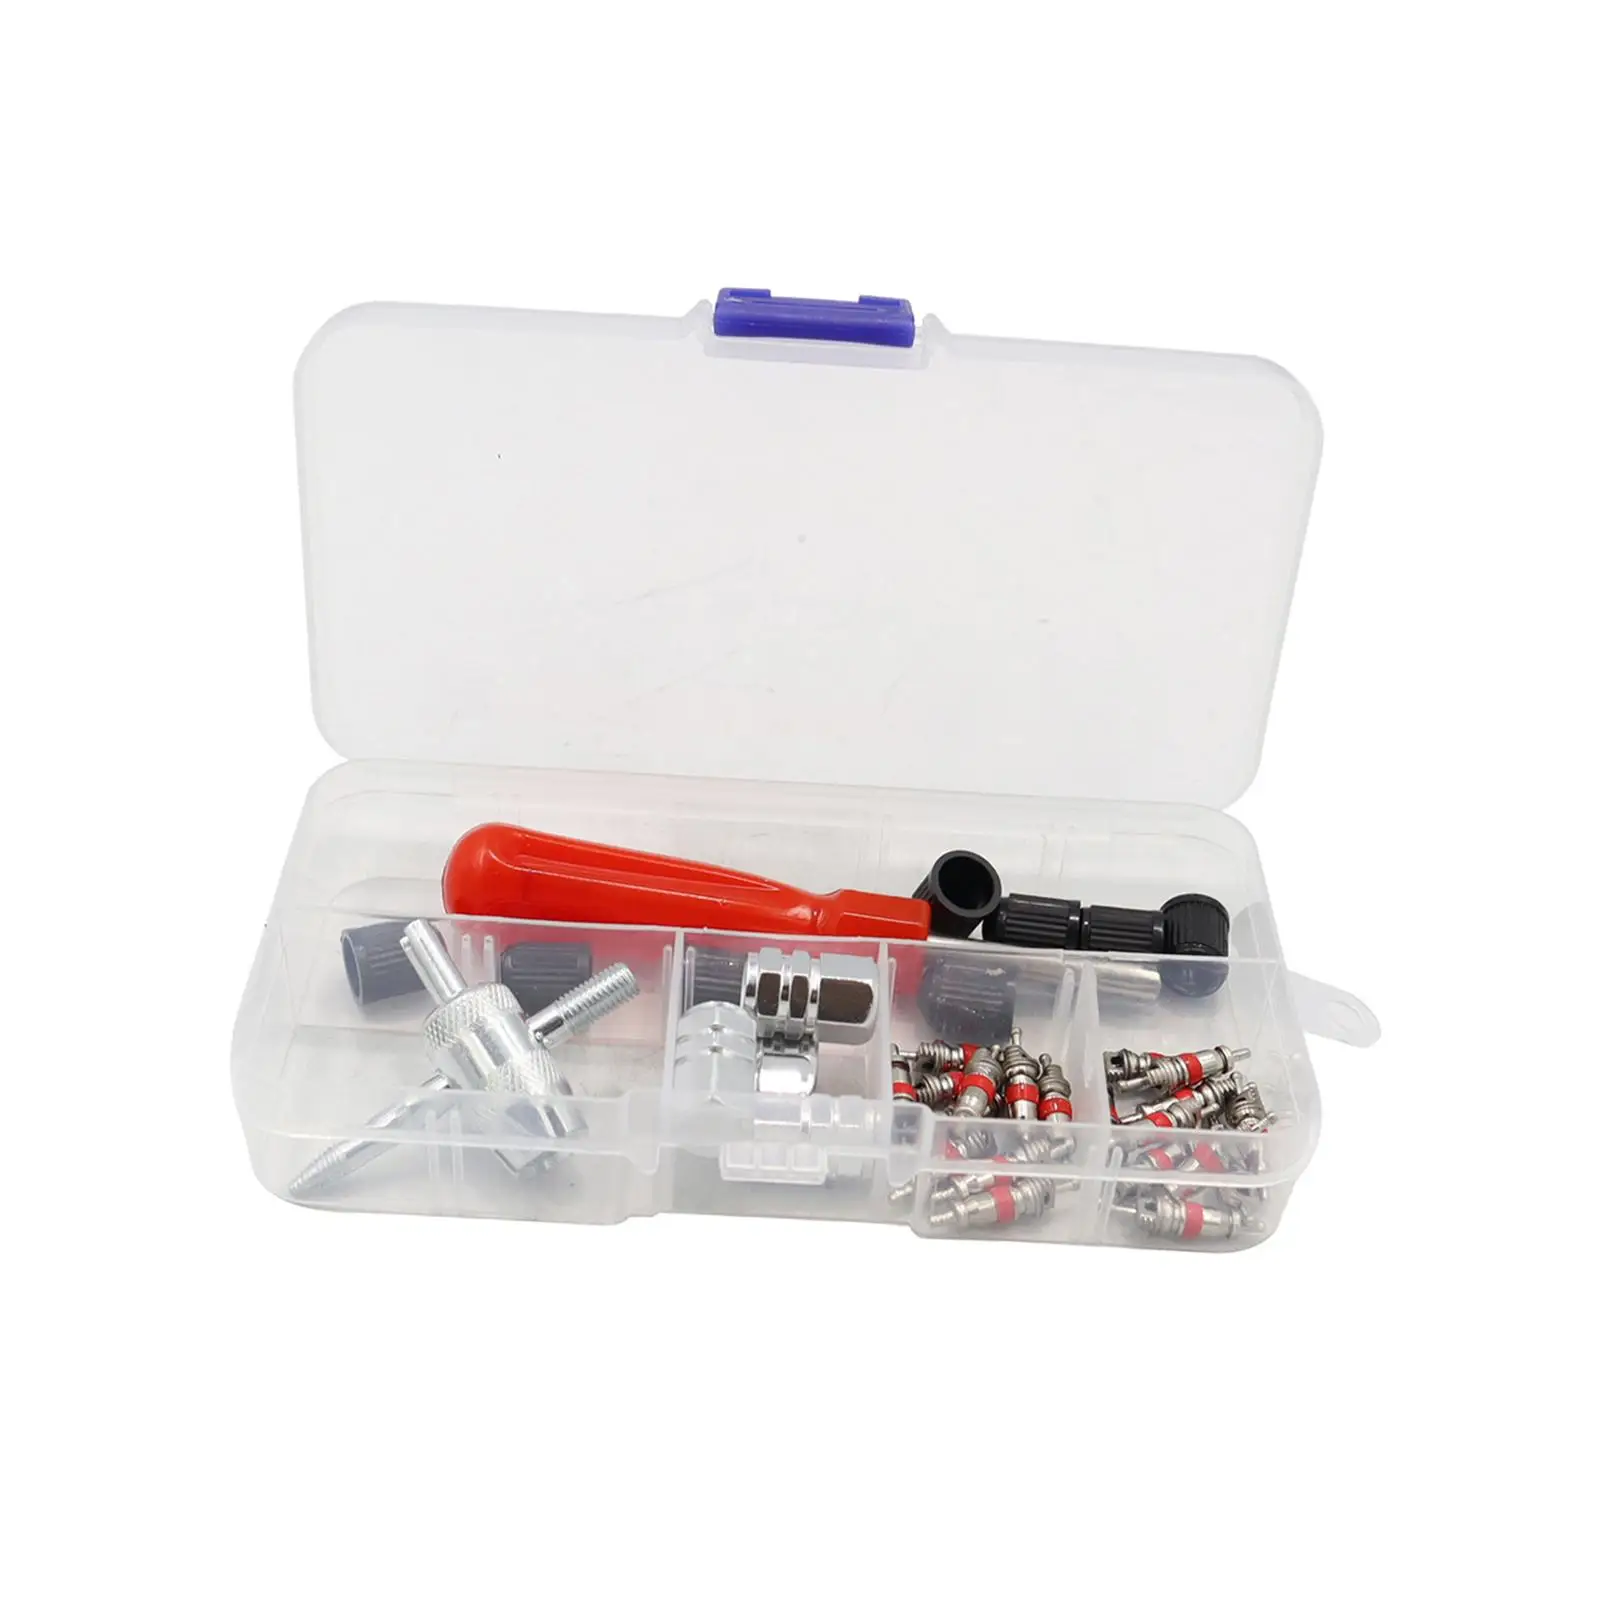 Tire Valve Stem Removal Tool Kit Tire Repair Tool Durable Professional Automotive Accessories 4 Way Valve Tool with Storage Box